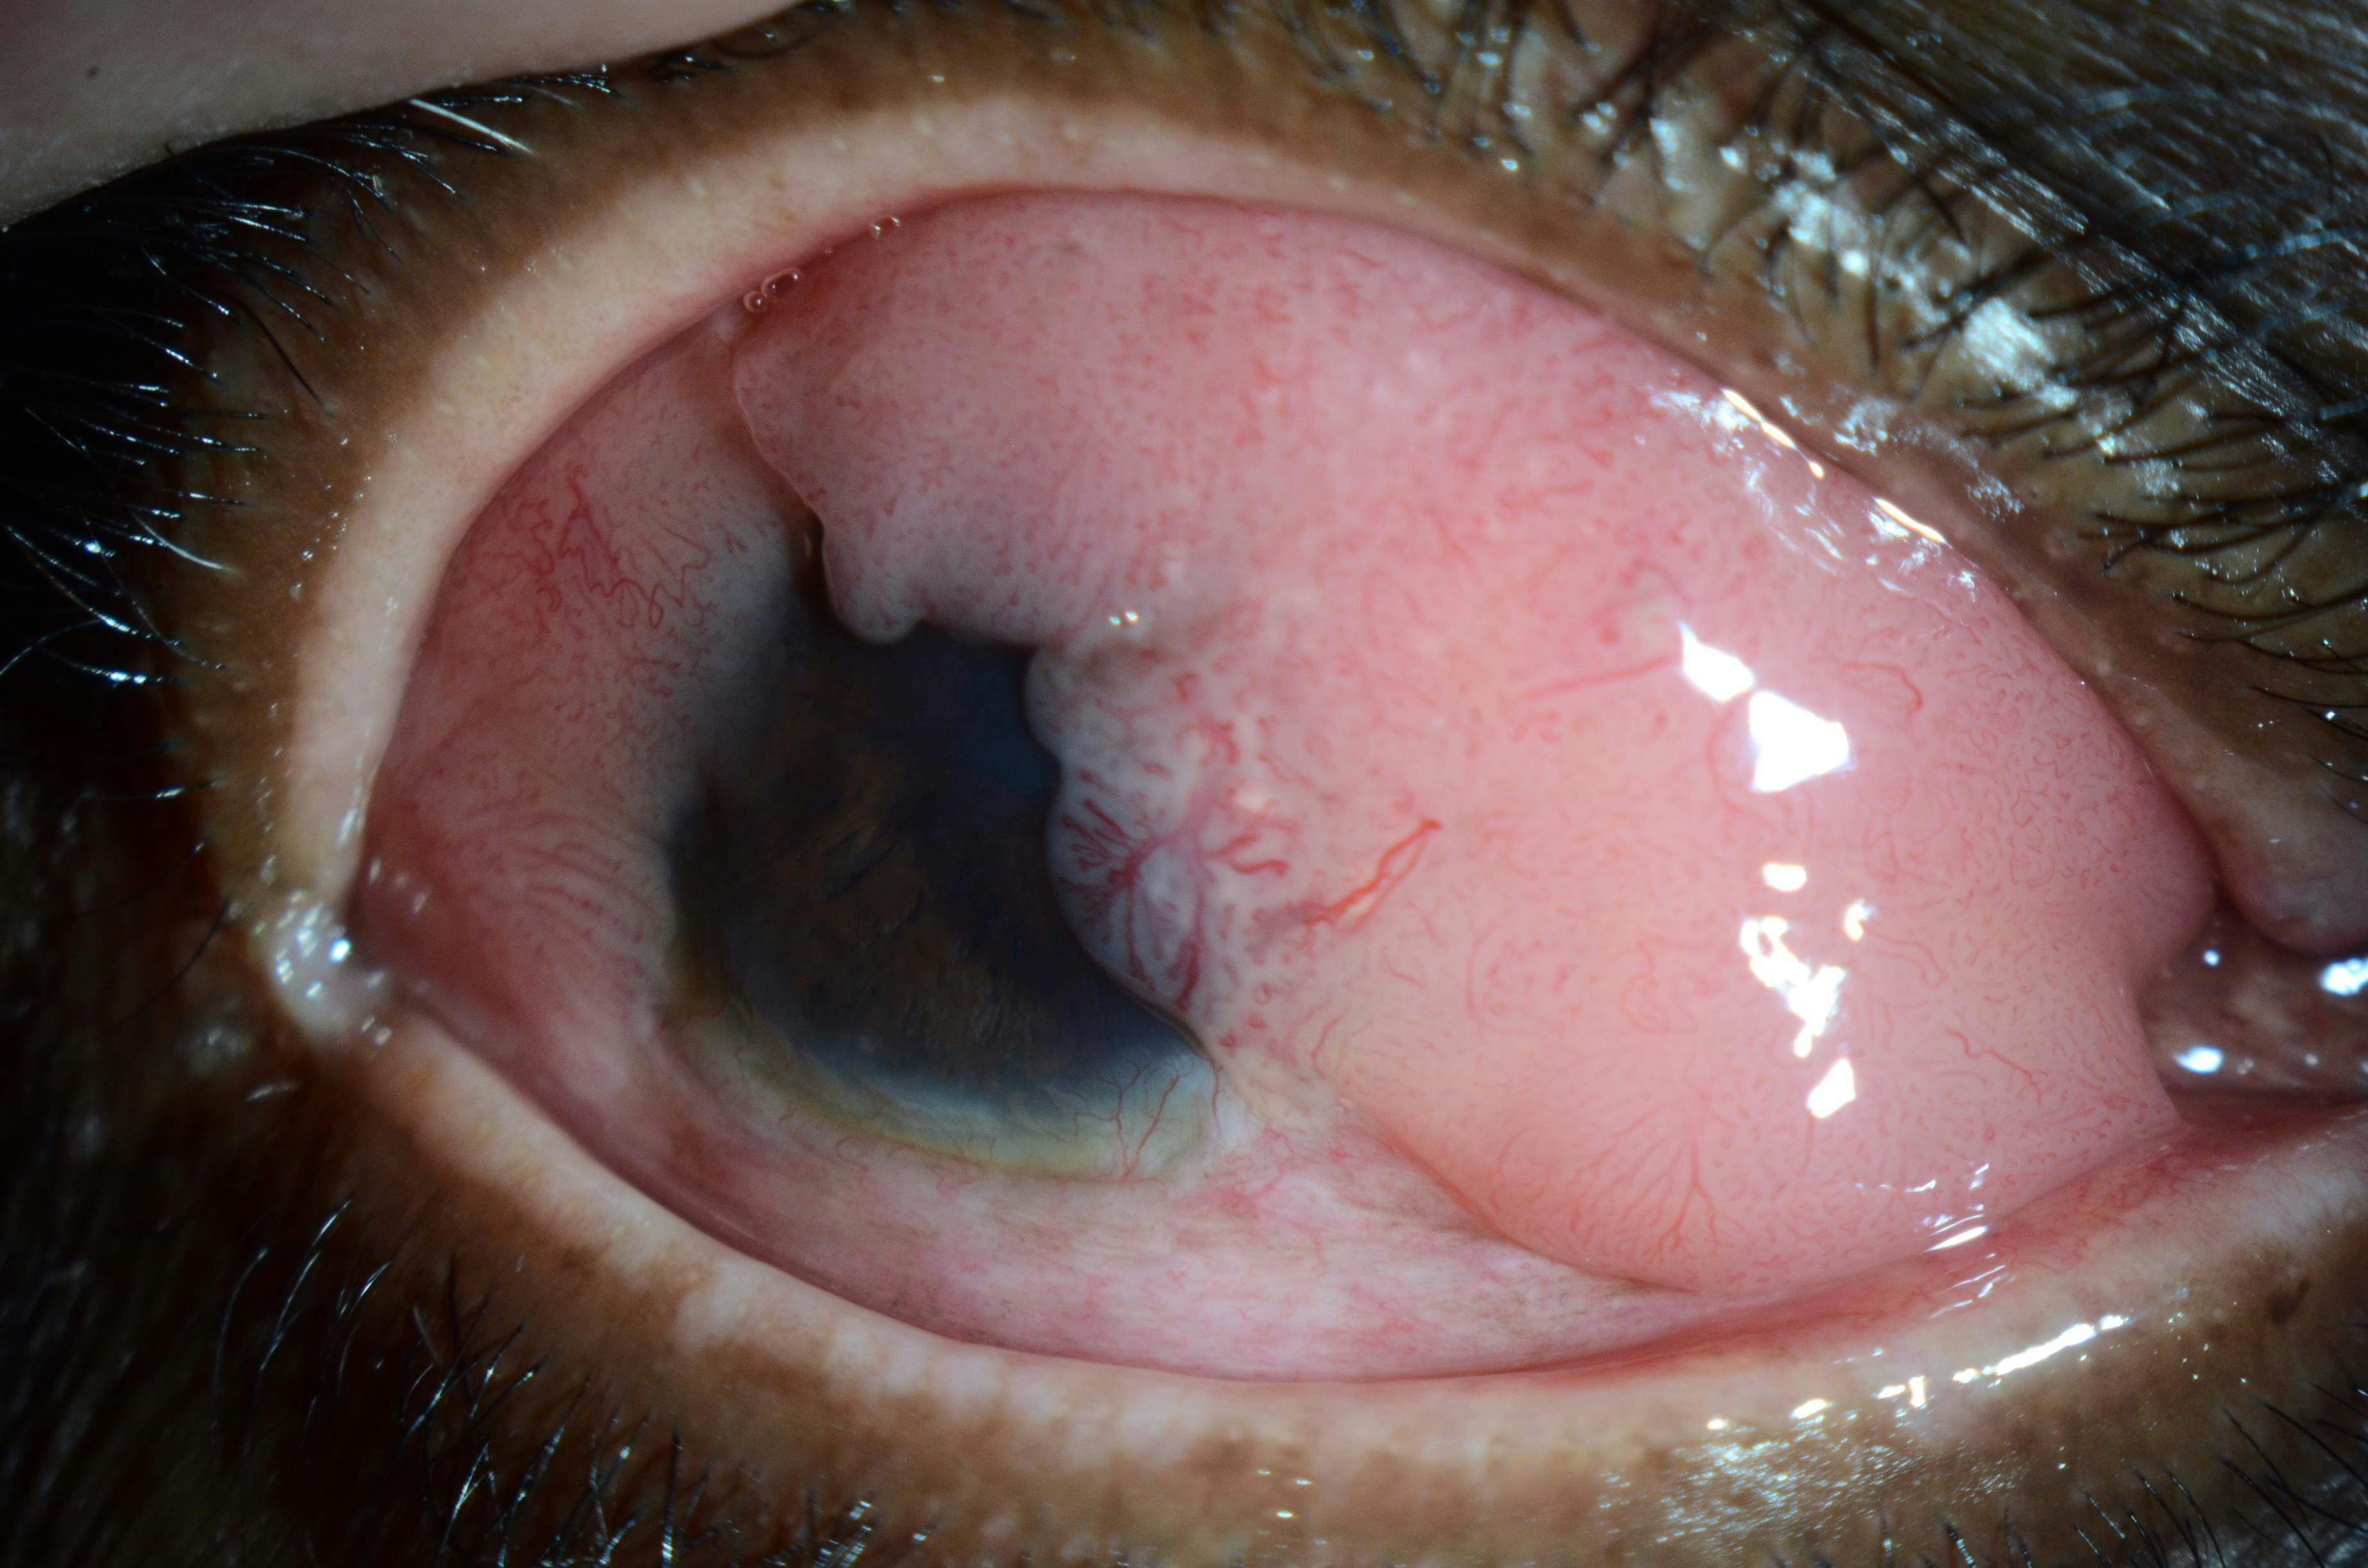 Ocular surface tumors are rare but serious events, and can be deadly for patients. (Image courtesy of Andrea Leonardi, MD)